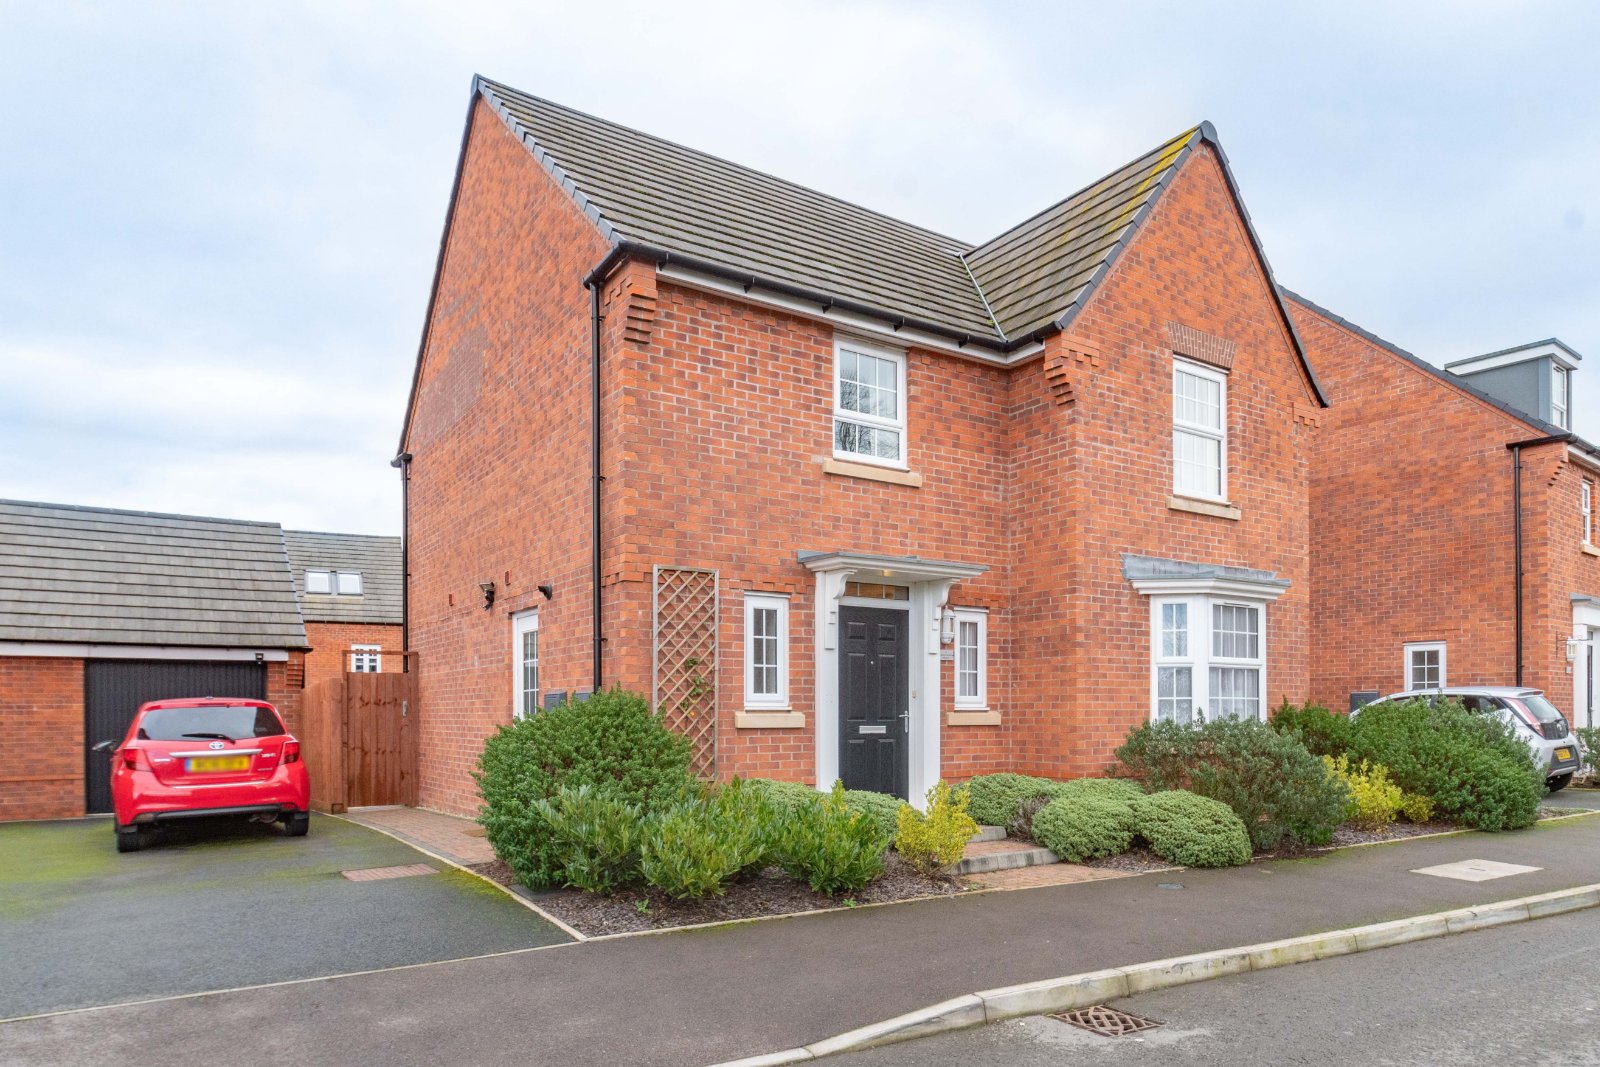 4 bed house for sale in Princethorpe Street, Bromsgrove 23